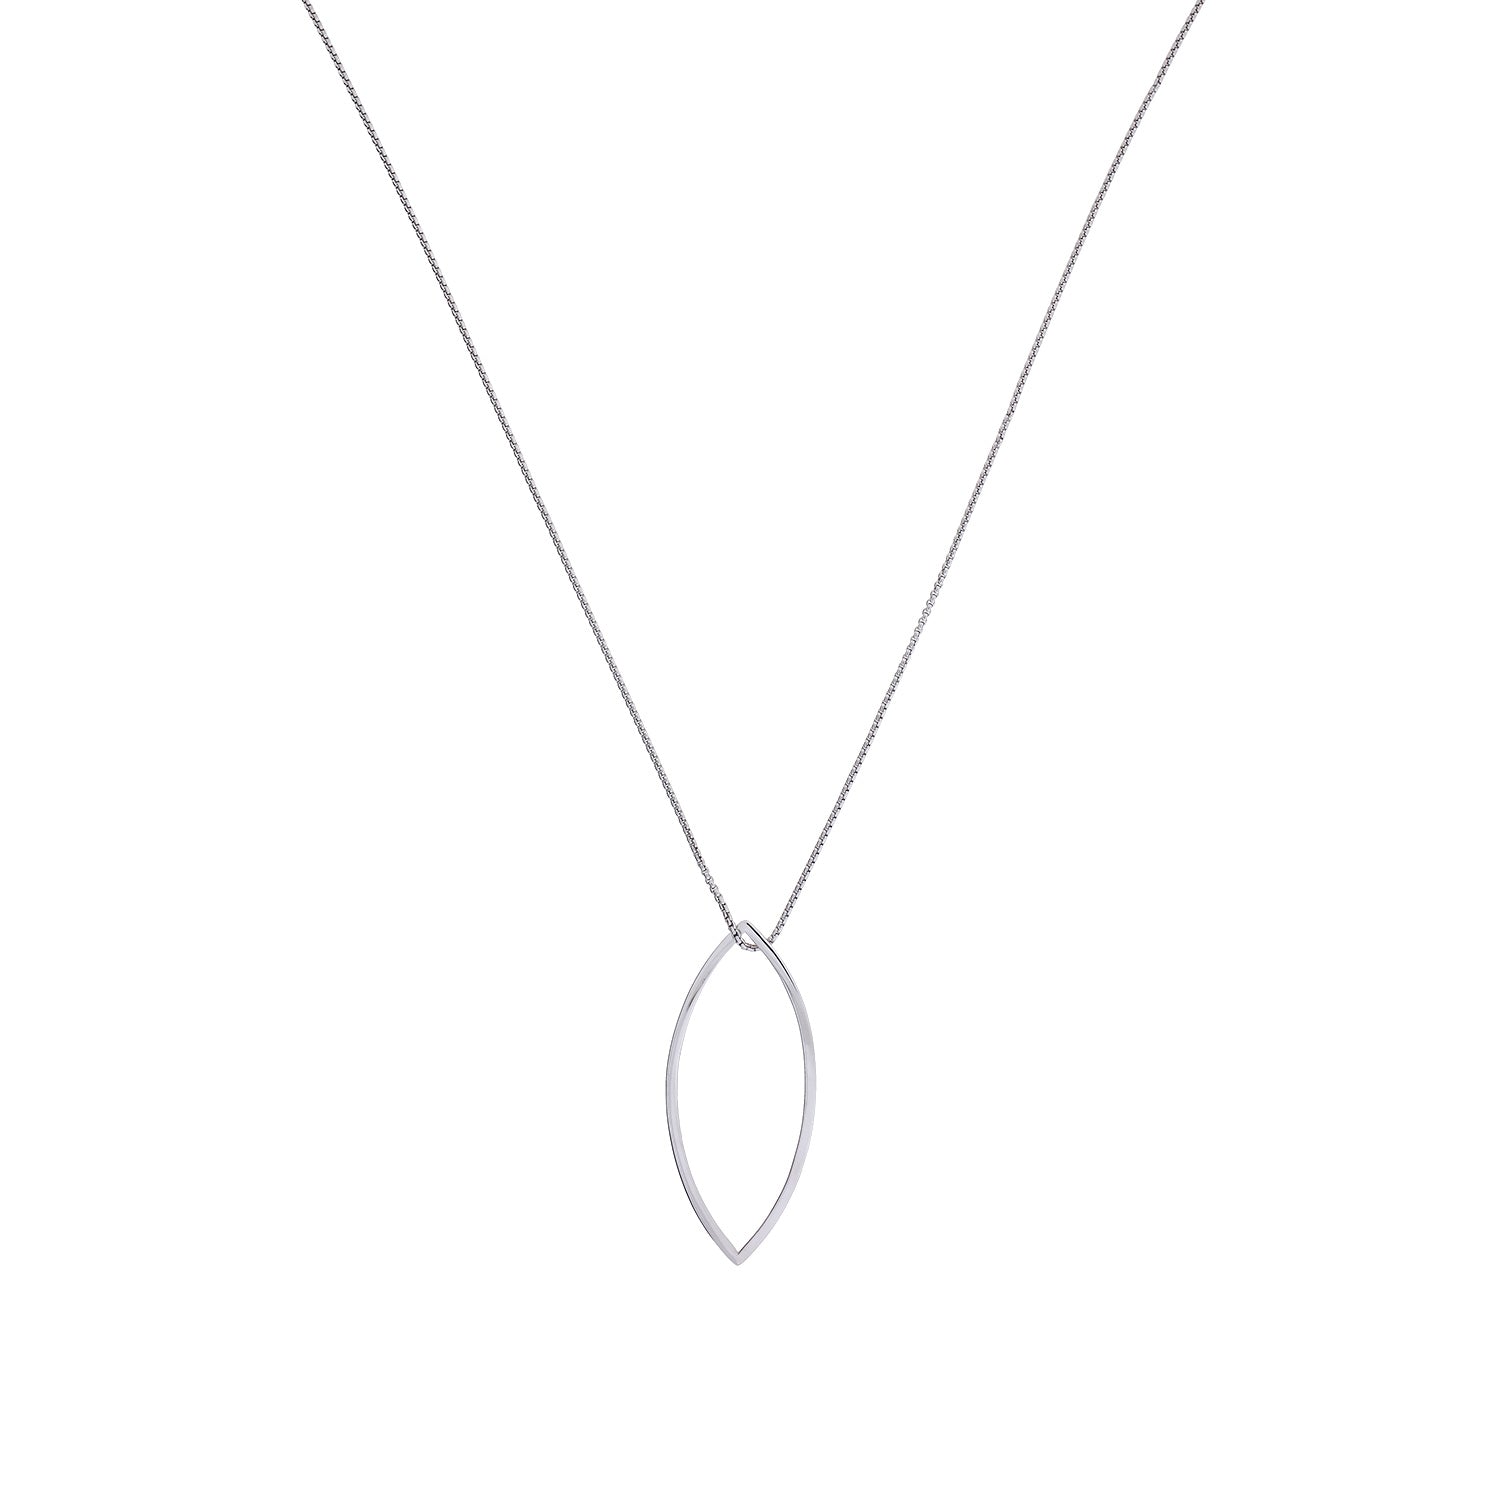 Pinnacle Shapes Necklace